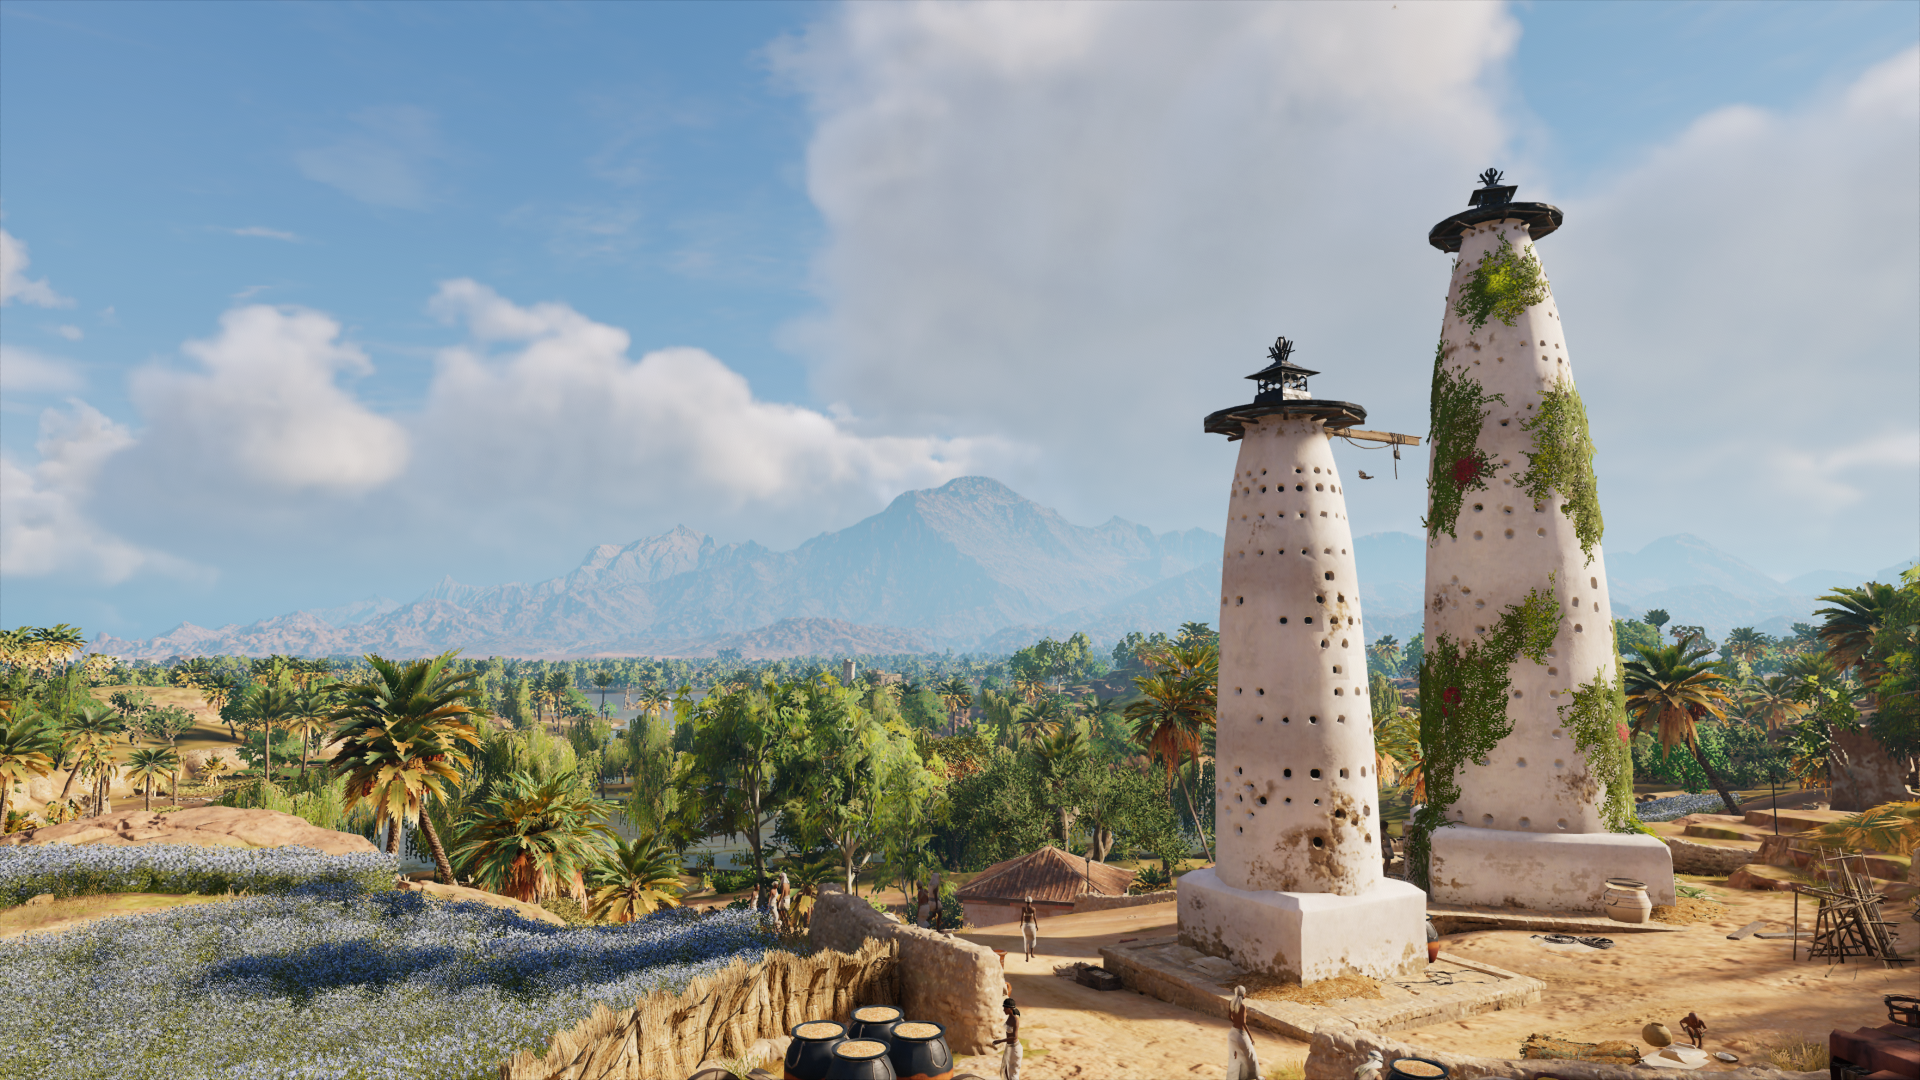 General 1920x1080 assassin creed origins Egypt video games PC gaming desert Assassin's Creed Ubisoft screen shot video game art sky clouds sunlight palm trees mountains CGI